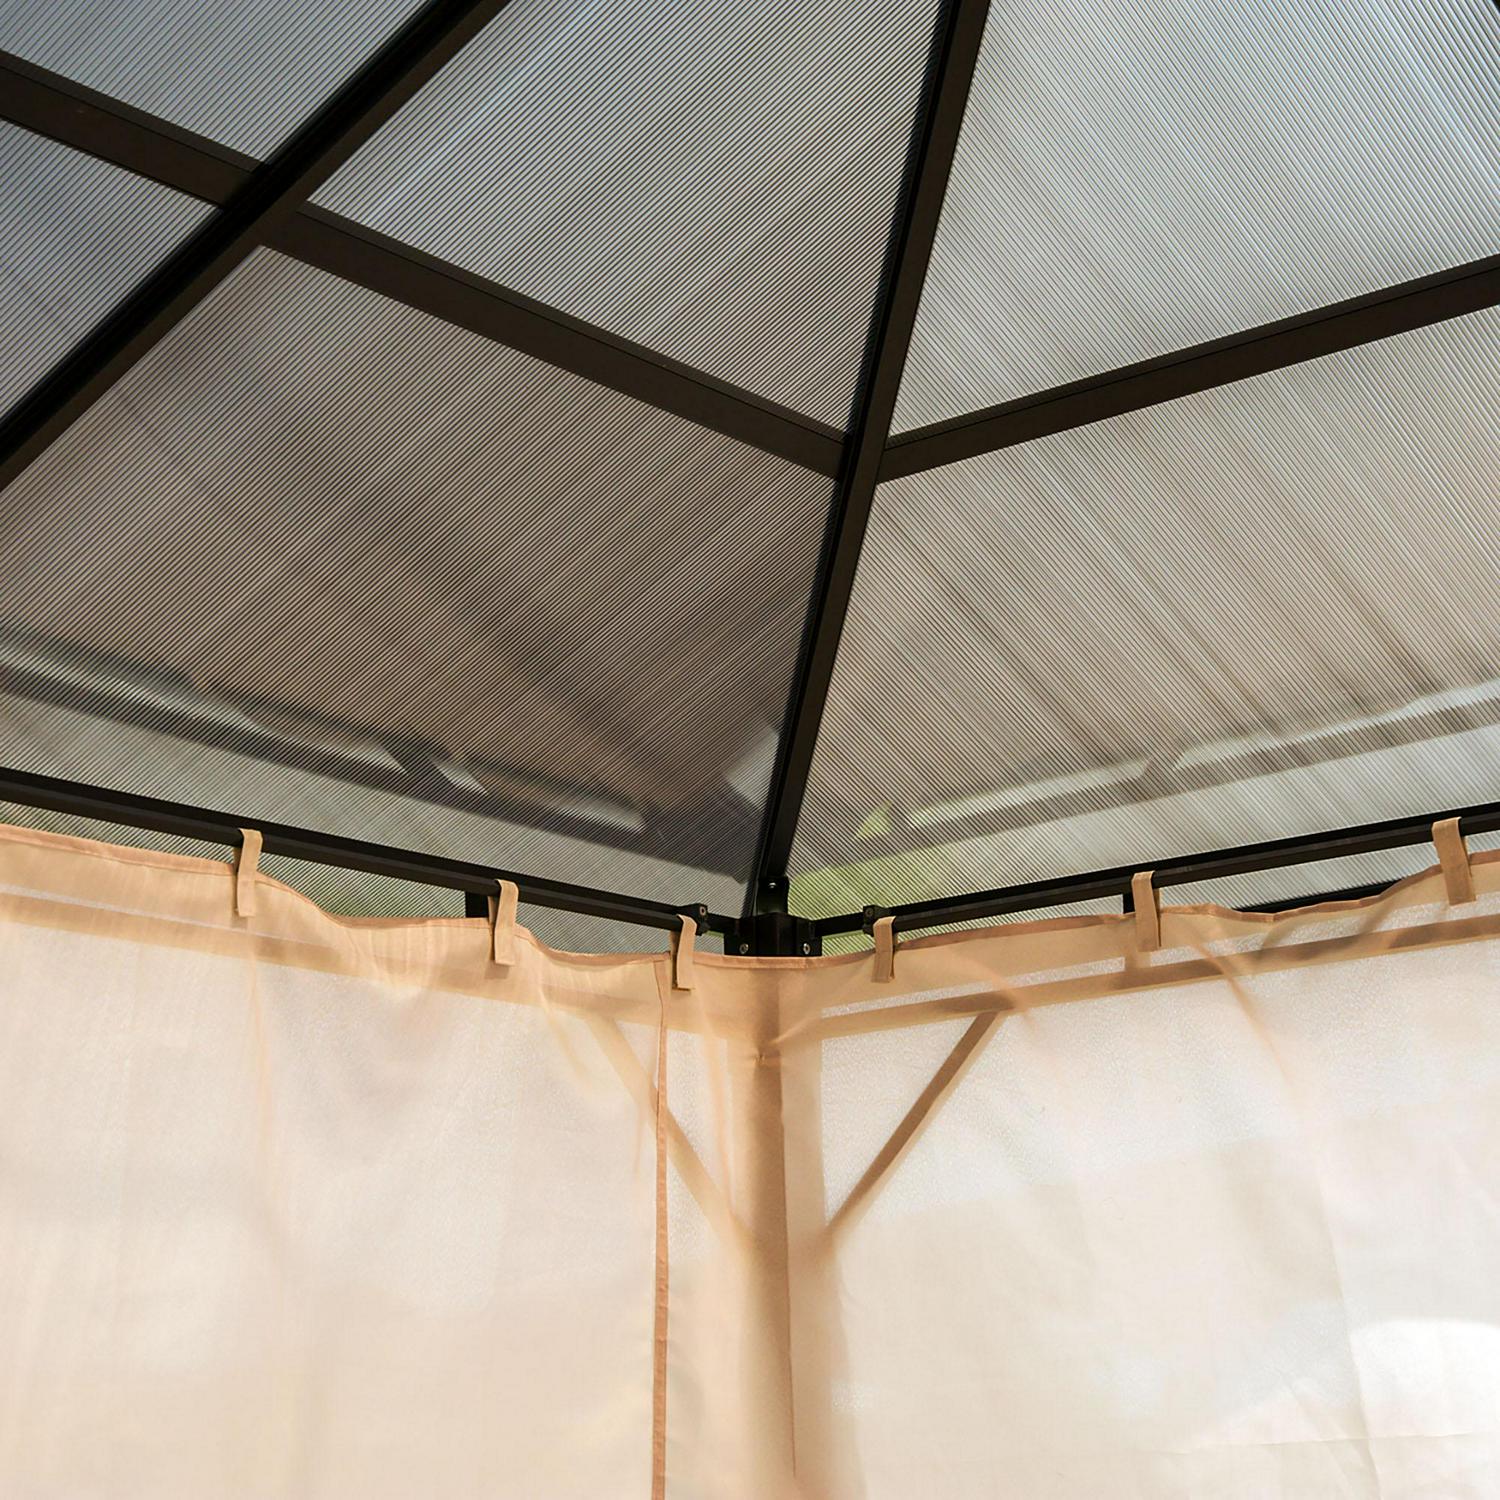 Hardtop Gazebo Canopy With Polycarbonate Roof - Brown